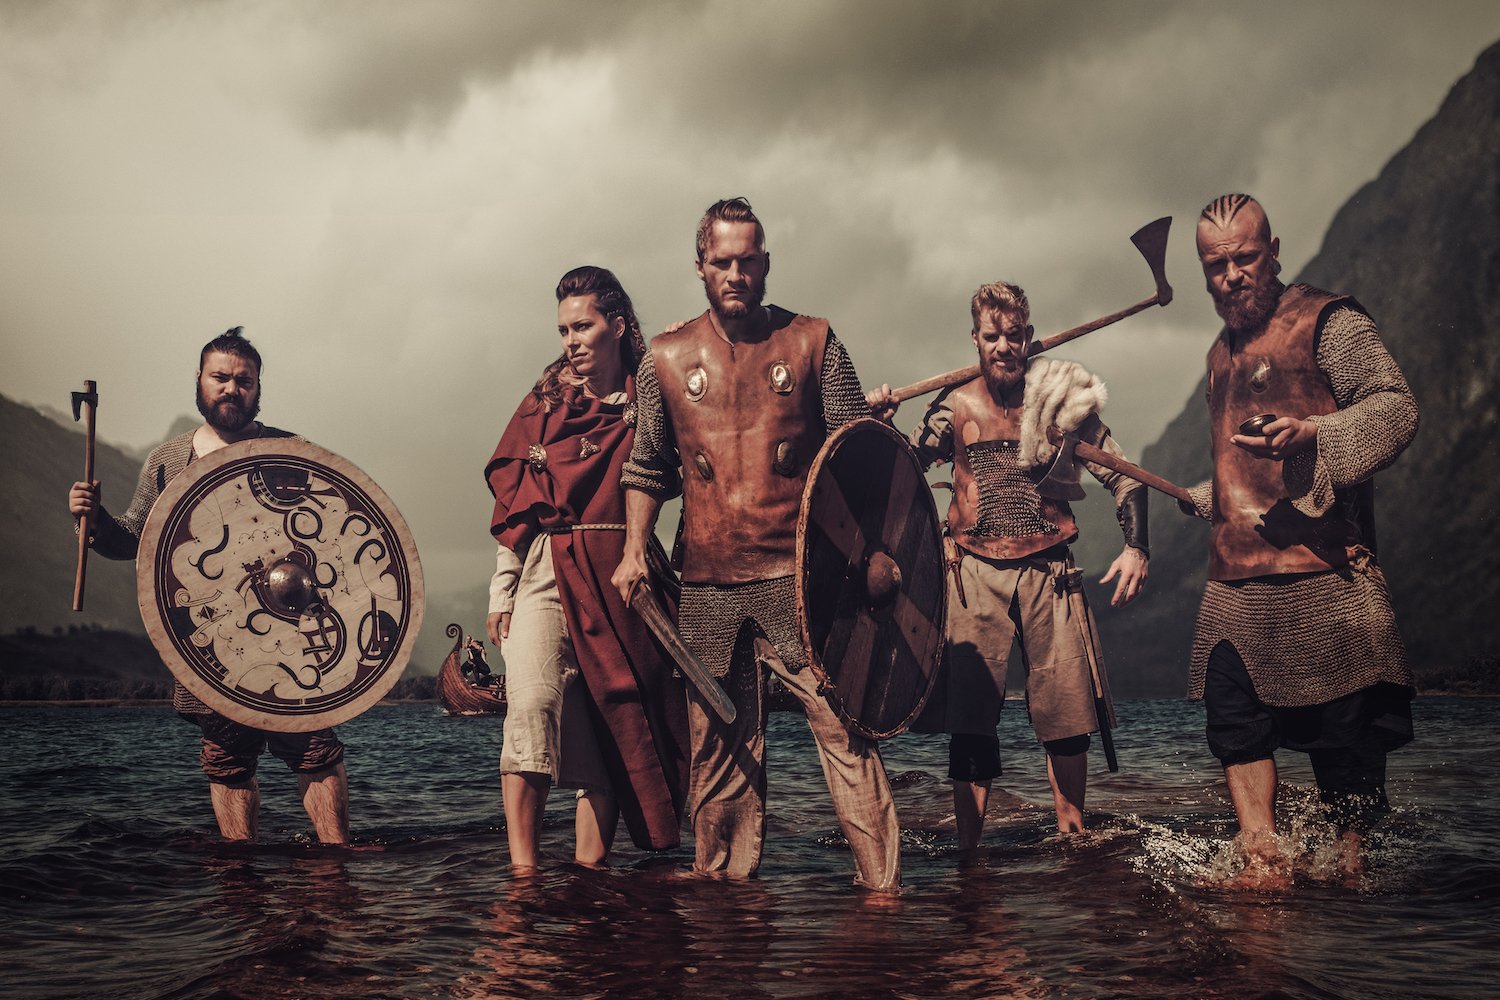 Only a True Movie Nerd Can Get 15/15 on This Movie Quotes Quiz. Can You? Vikings